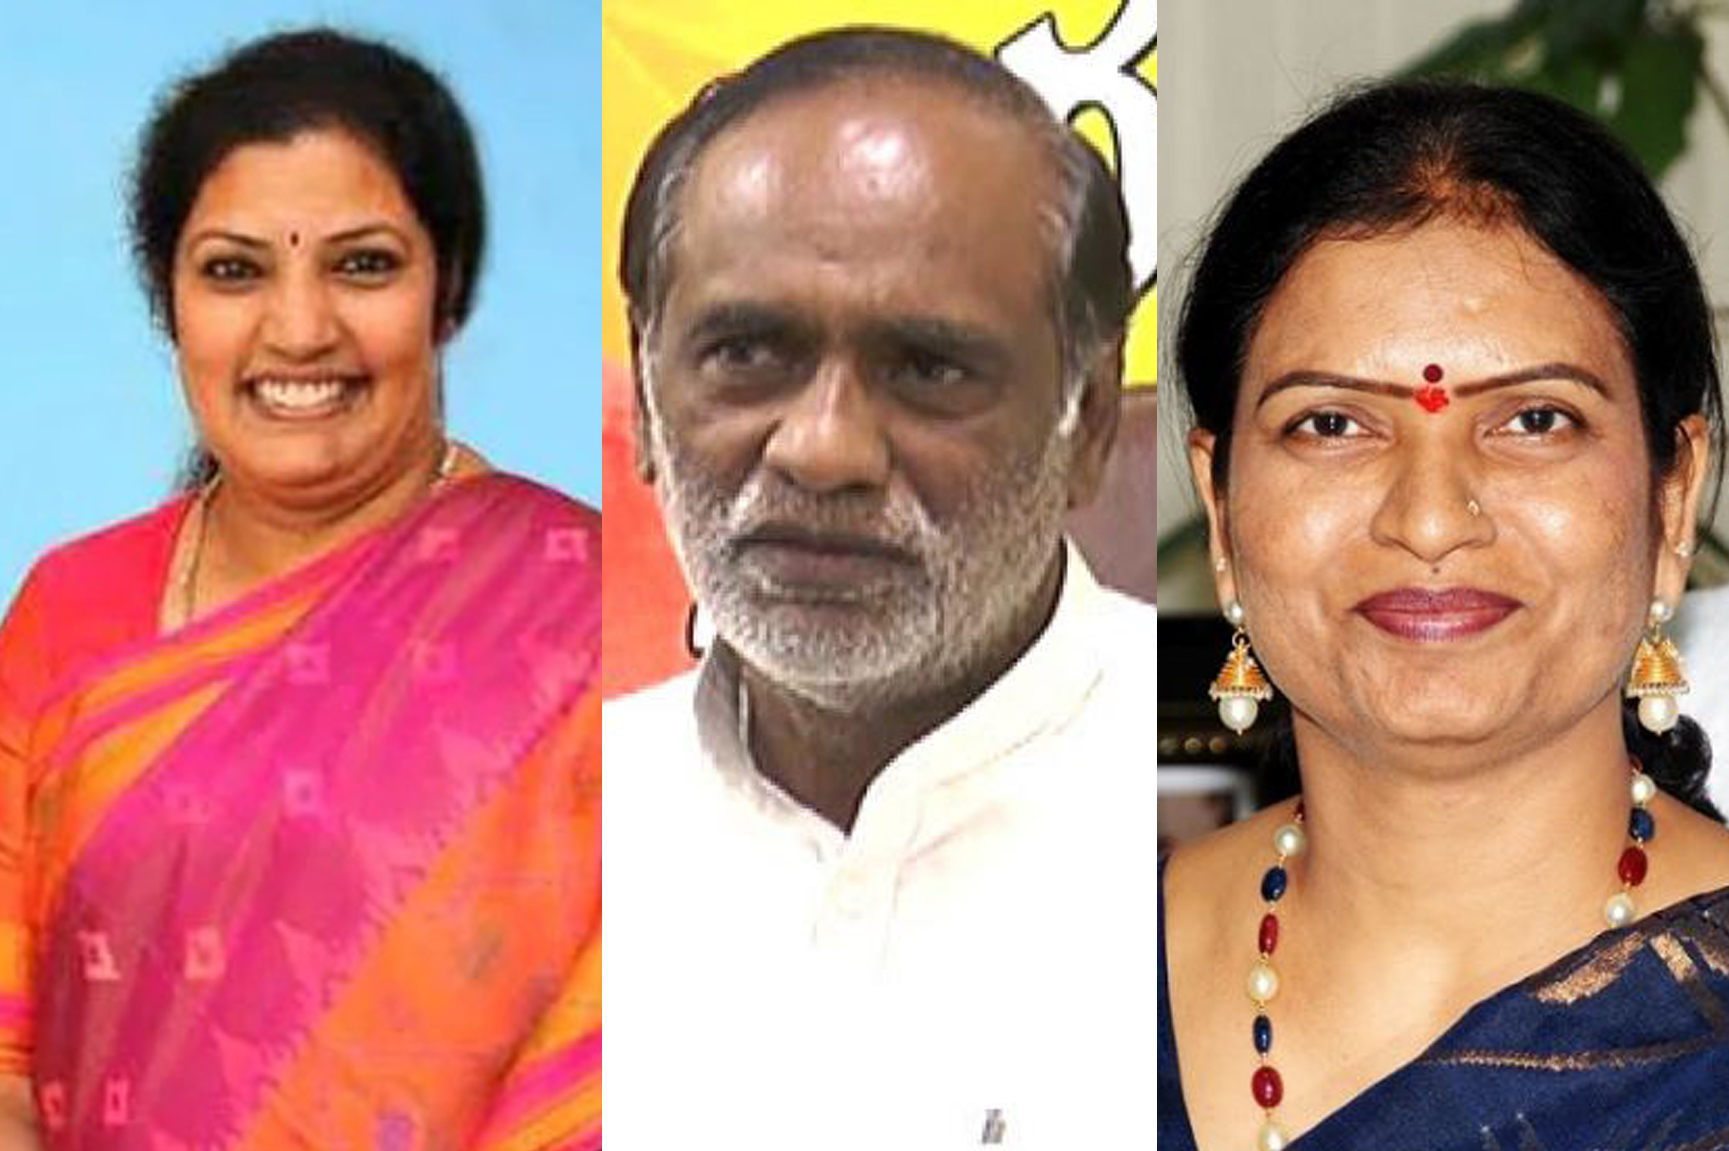 BJP appoints Puradeswari, Lakshman, Aruna in key positions. The party tries to balance the castes in the two Telugu States.